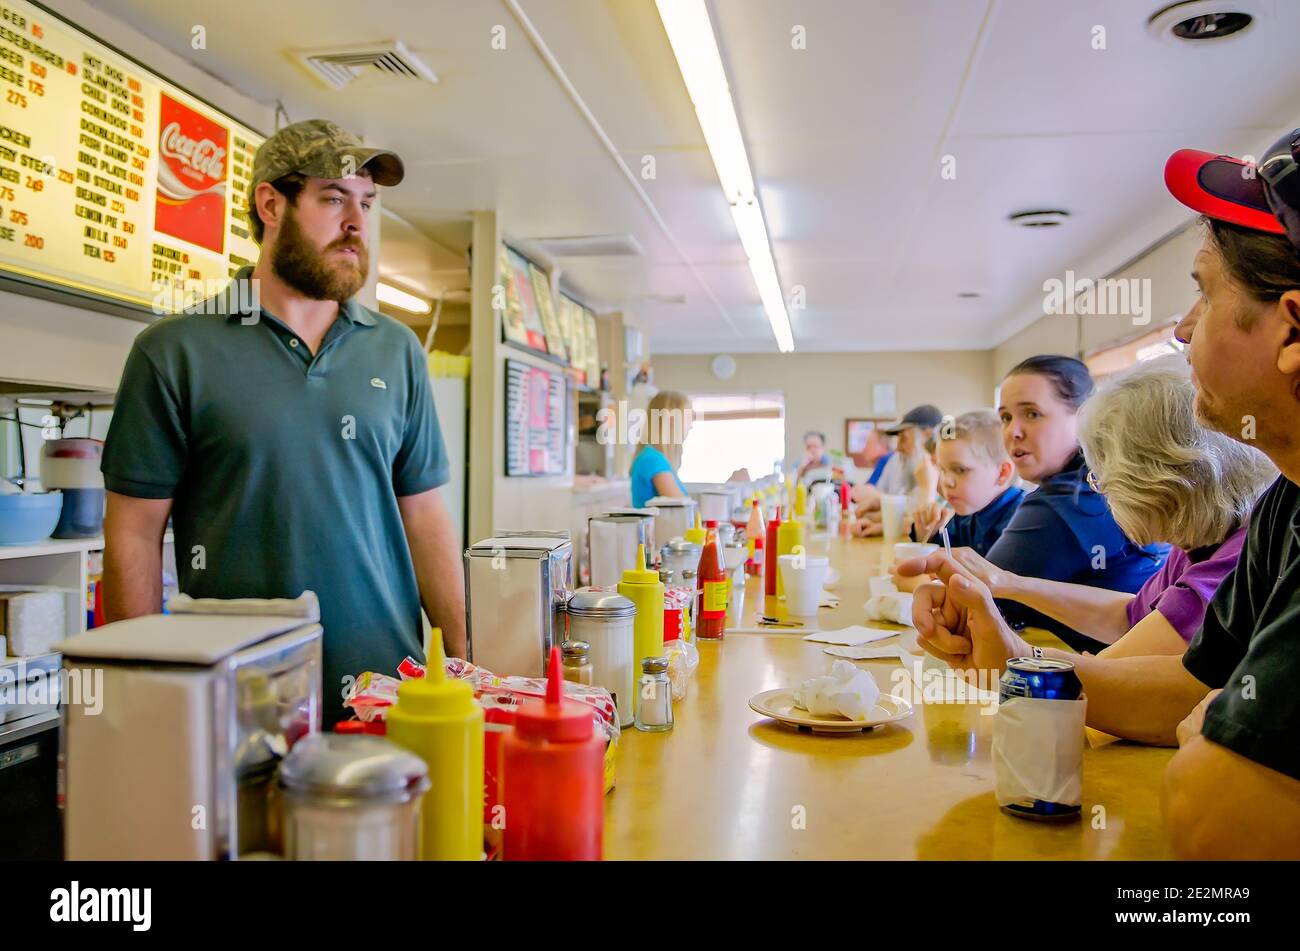 A clerk waits on lunch customers at the White Trolley Cafe, March 14, 2012, in Corinth, Mississippi. The diner is known for its slugburger. Stock Photo